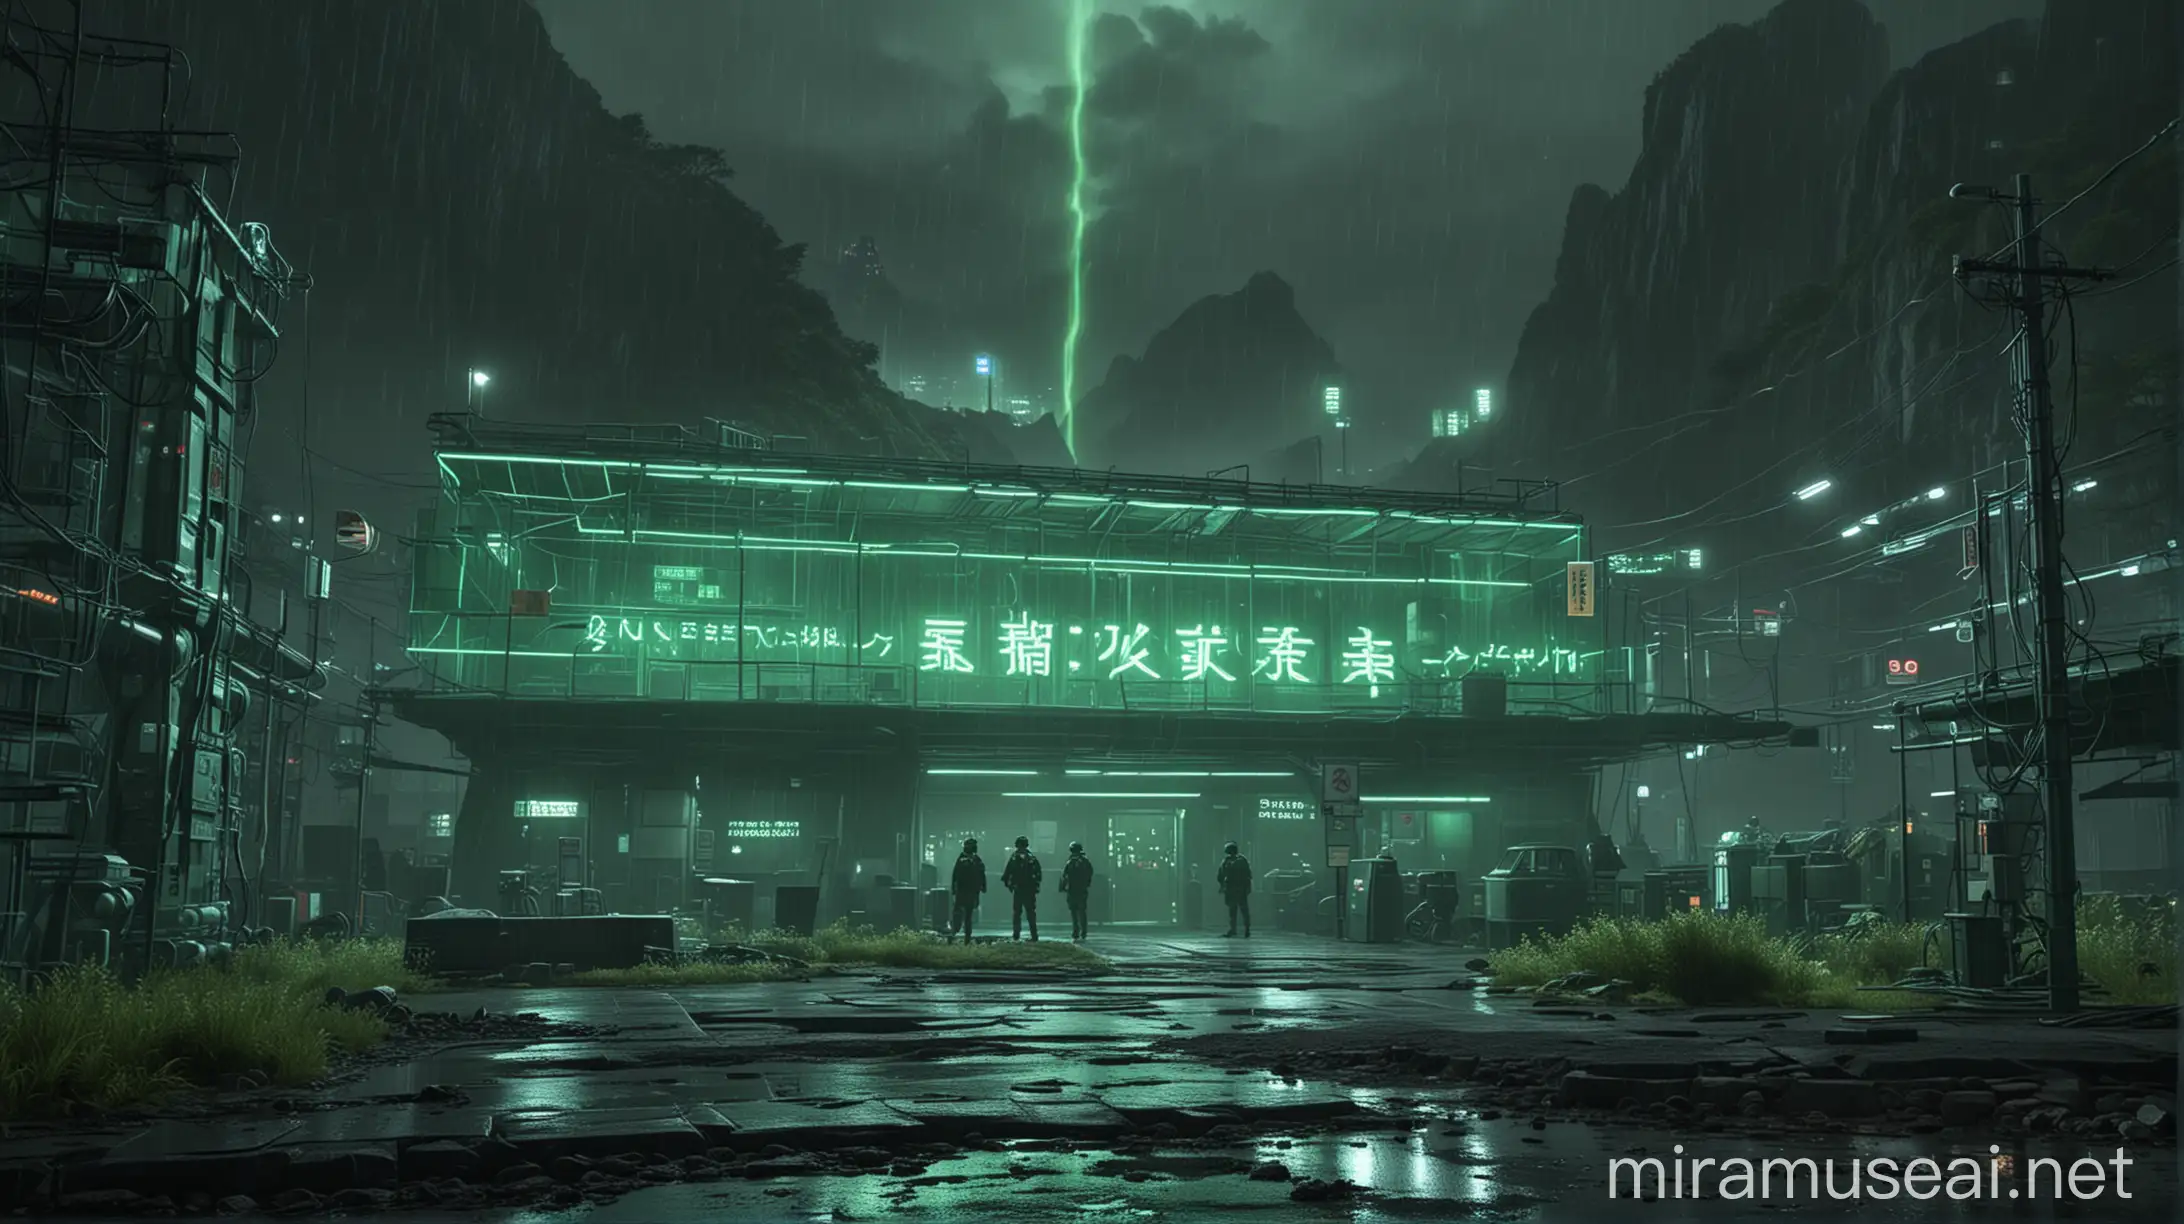 Realistic Japanese research centers buildings with one worker around it, green neon and huge neon lights inside the part, its color shadow on the floor, Rainy weather, staff in dark green uniforms and helmets, Atmospheric and cinematic, The huge structures, A dark green smoke rose from the research centers environment and spread in the air, The image space is outside the realistic research center.
with huge satellite antennas,
A huge cubic green neon object,
in the Realistic mountains.
atmospheric and cinematic.
All overall dark green image theme.
Very big lights and lots of green neon lights.
The neon lights in the image should be very bright throughout the image.
The neon lights in the picture should be very bright in the dark
The neon lights in the picture should be very bright.
Very large and bright neon lamps in the structure.
Shades of green throughout the image.
3D.
Several large advanced and strange buildings nearby.
With large Japanese inscriptions on the structure.